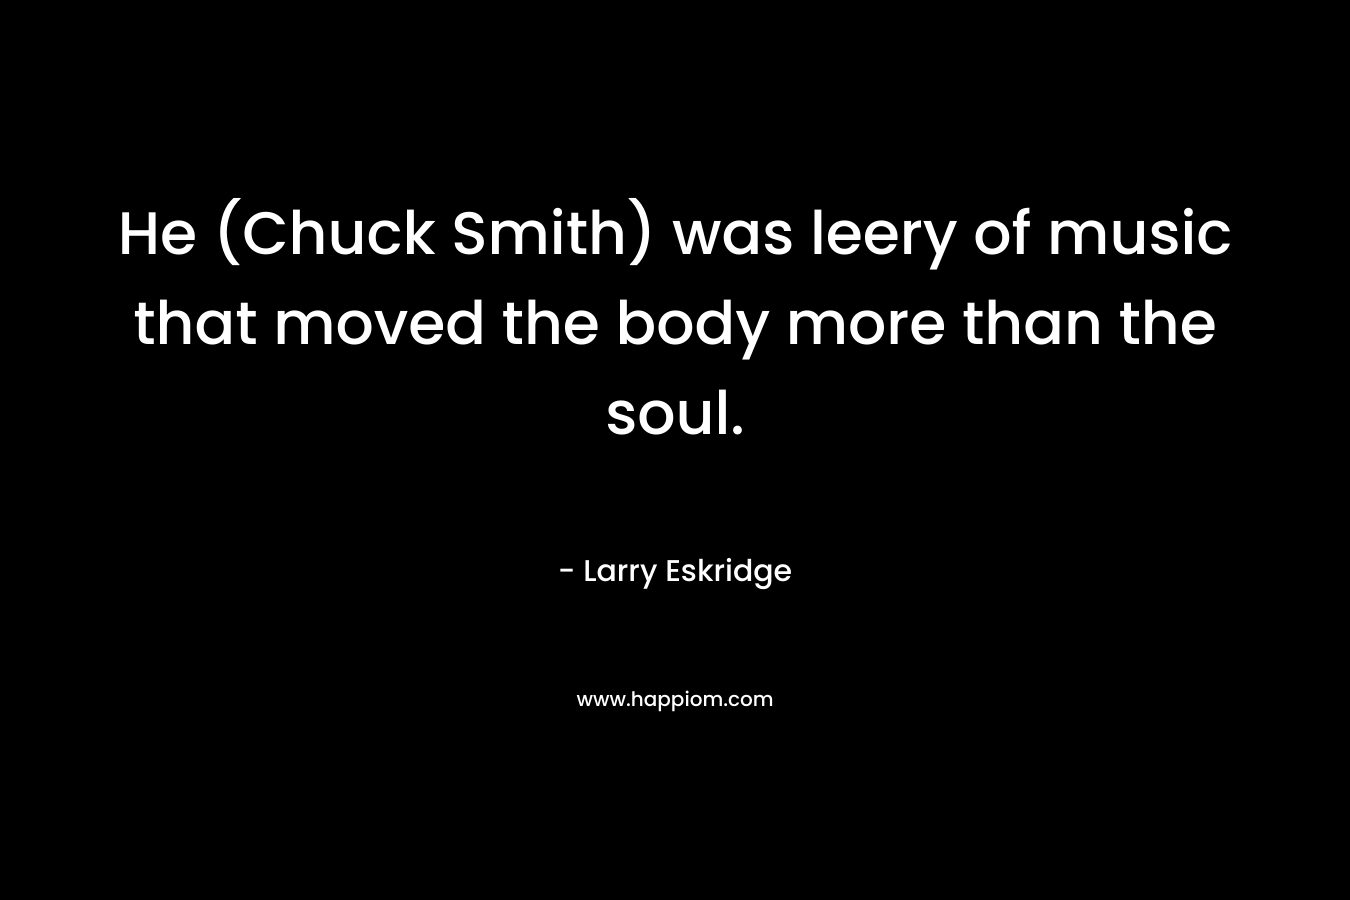 He (Chuck Smith) was leery of music that moved the body more than the soul. – Larry Eskridge